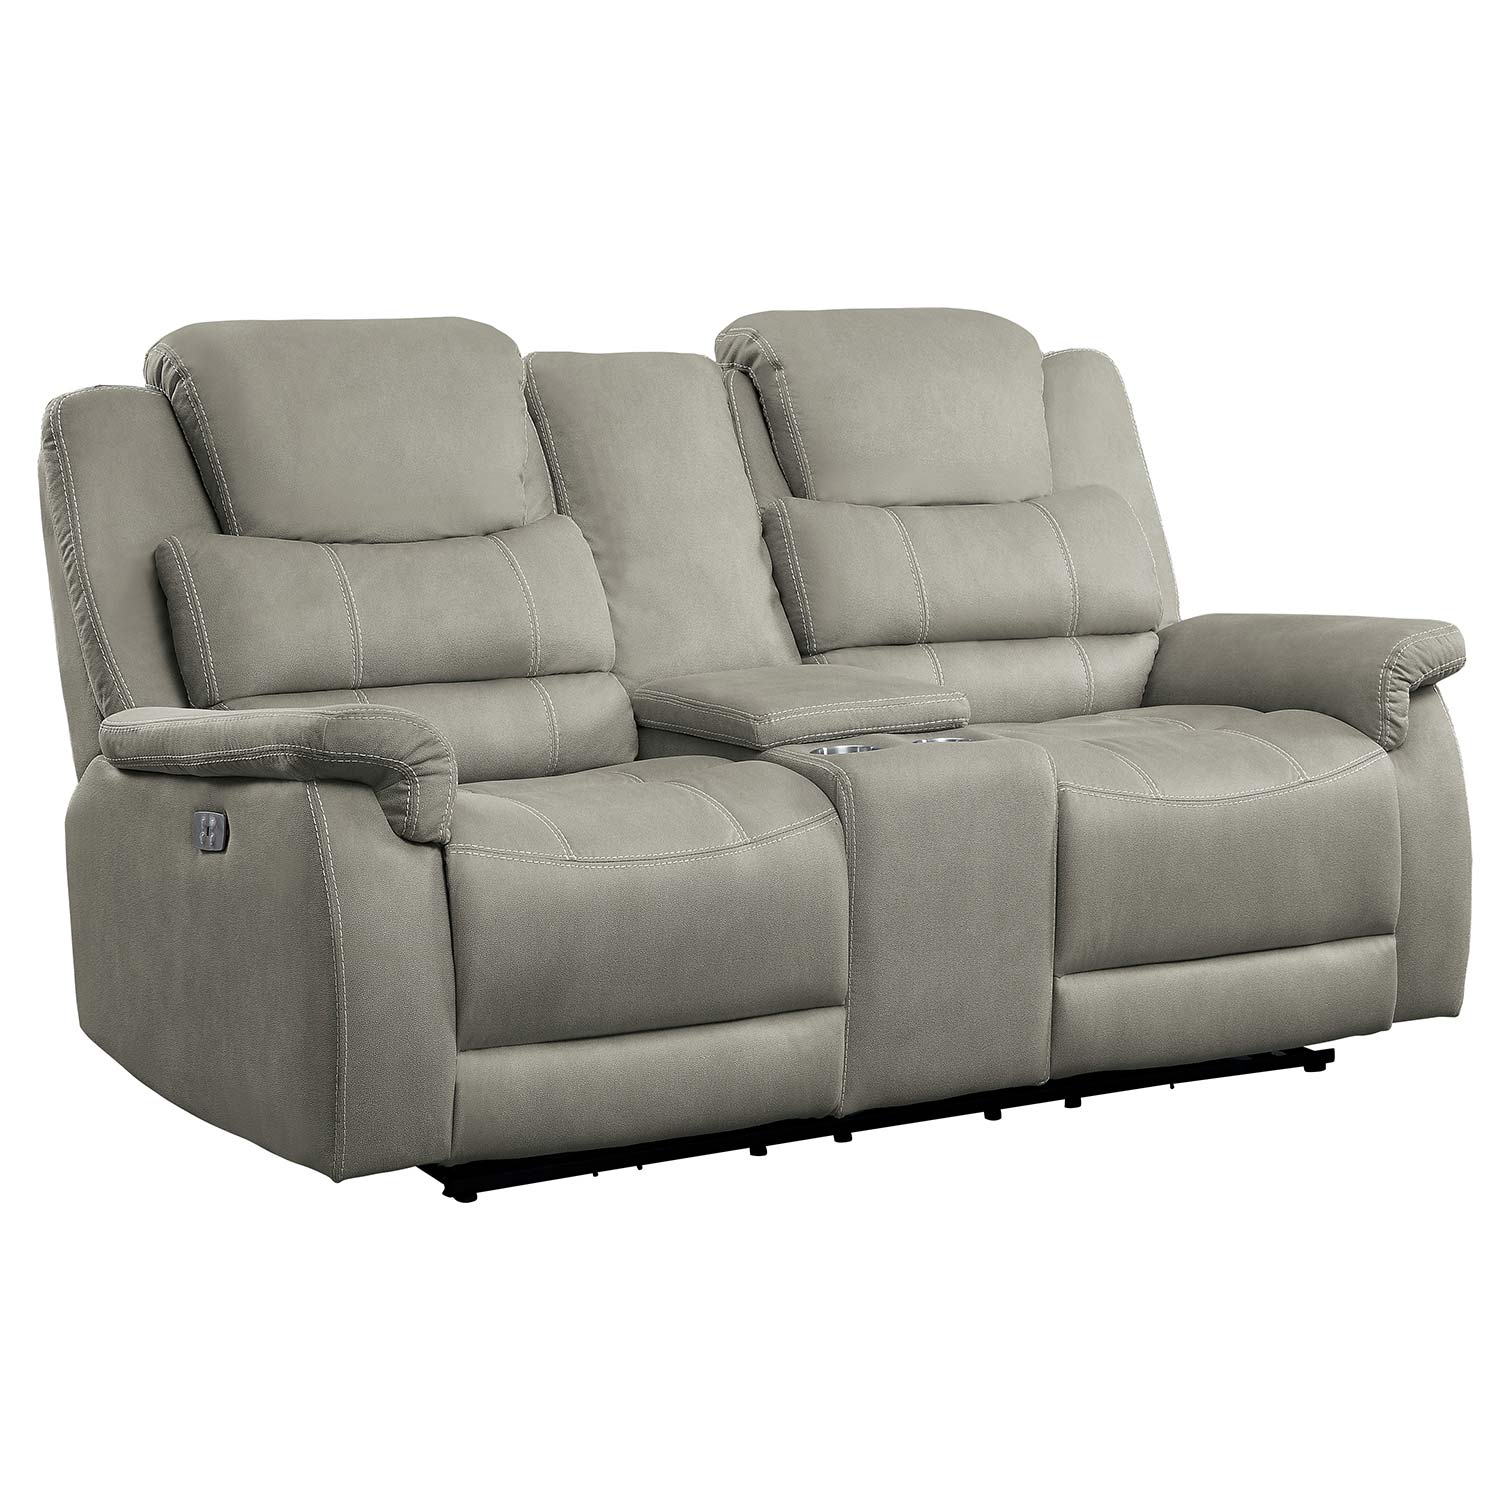 Homelegance Shola Double Glider Reclining Love Seat with Center Console - Gray